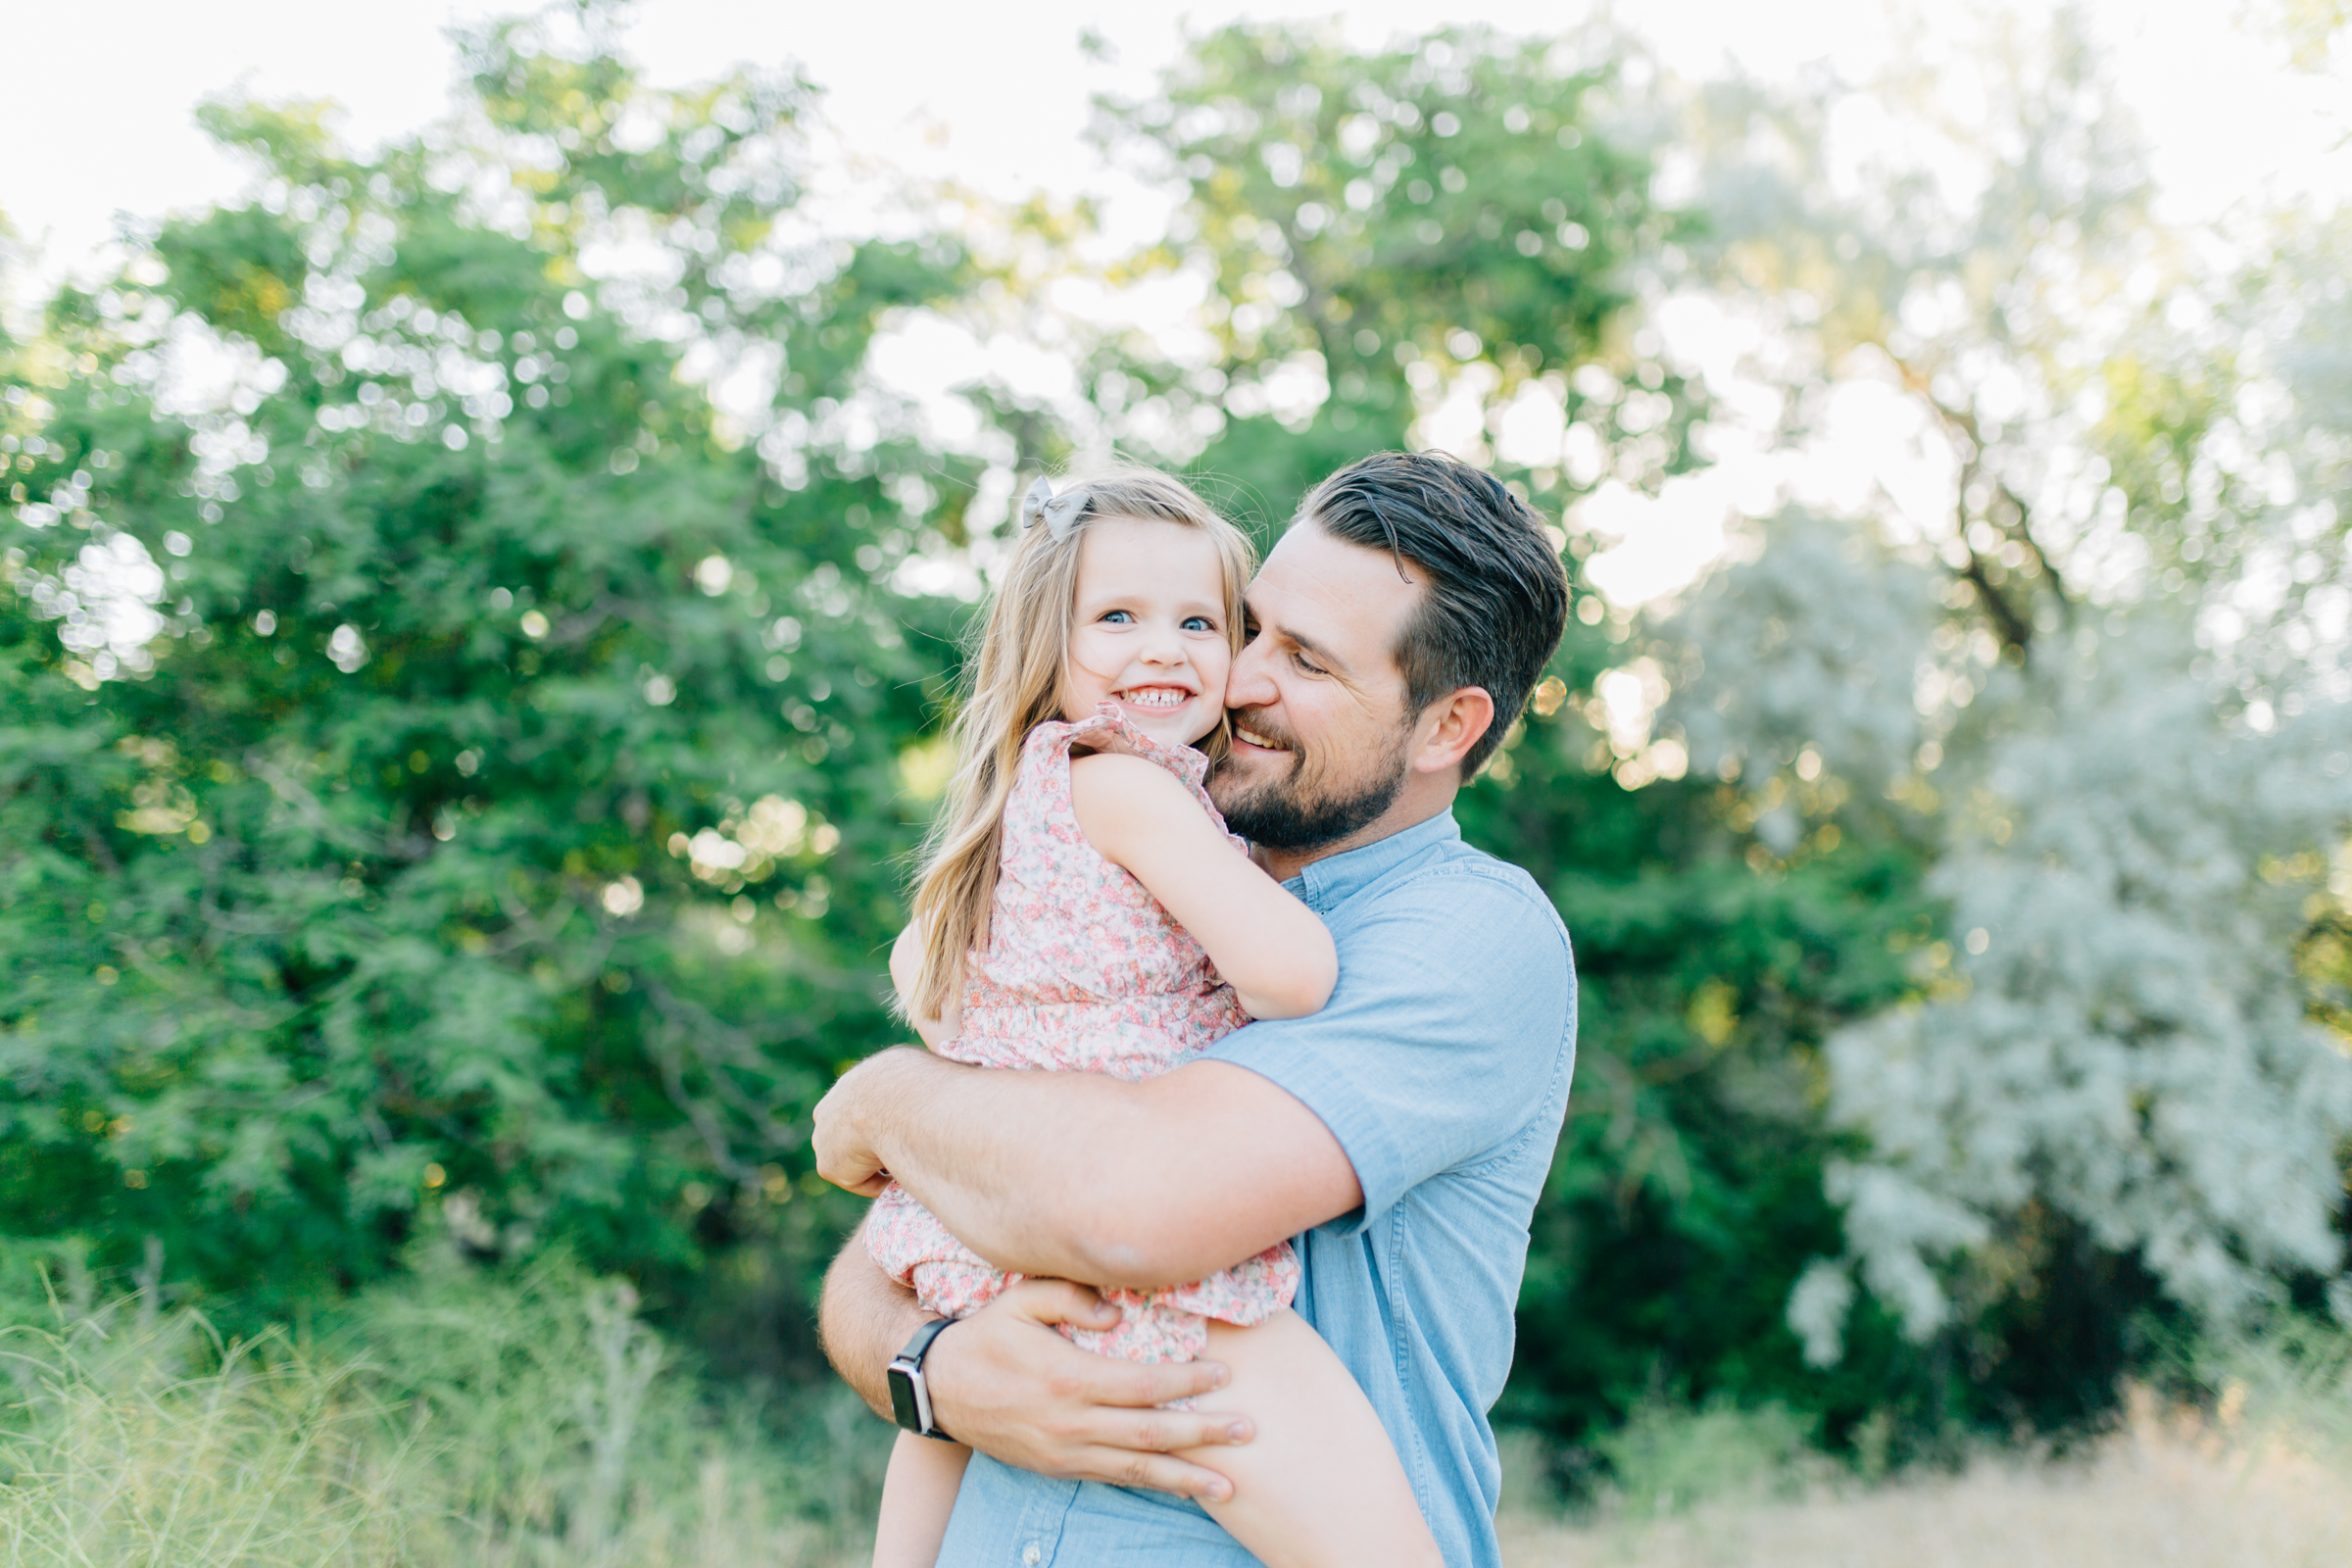 Ultimate Guide for Planning Family Photos With Kids | Flytographer